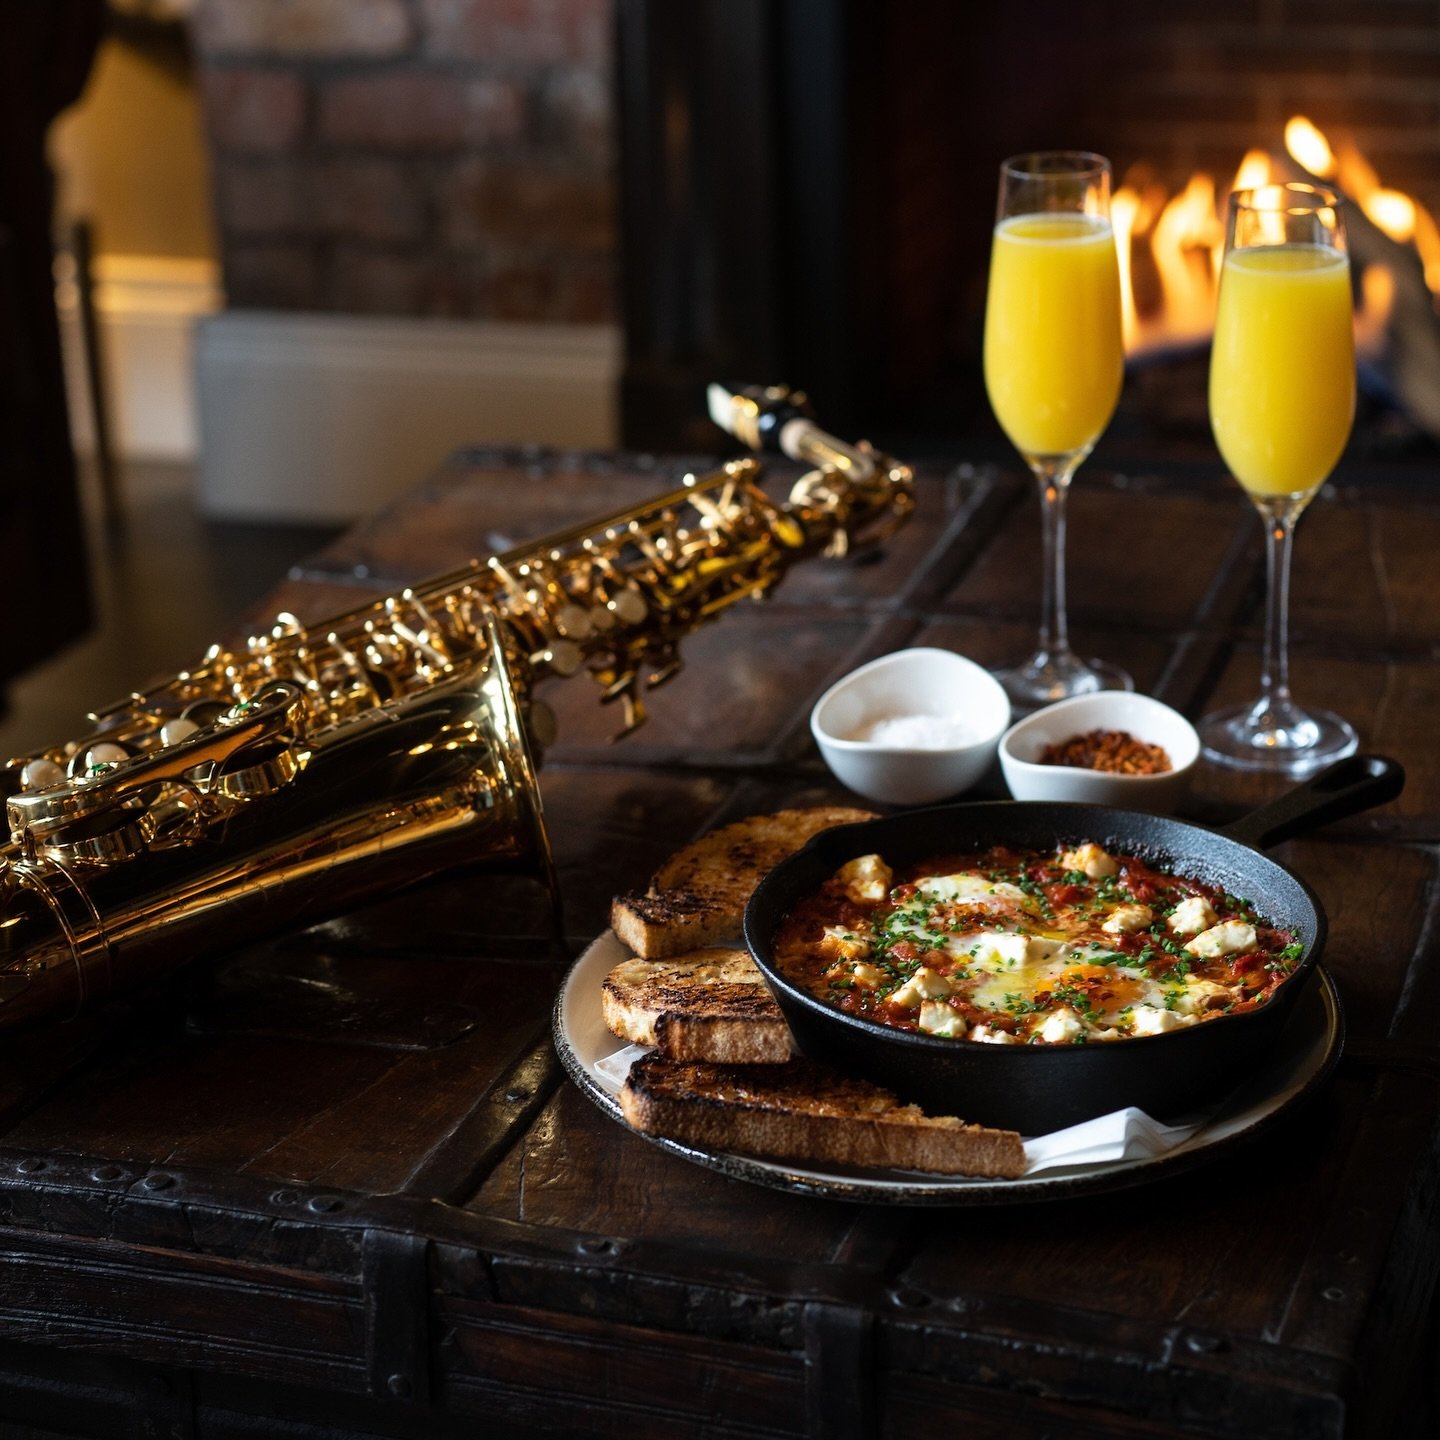 Following the outstanding response to our now sold-out Barking Dog Sundays pop-up, we are thrilled to share that our next special-edition dining experience is Jazz Brunch.

Feast on a mouthwatering menu of decadent brunch dishes, curated by executi